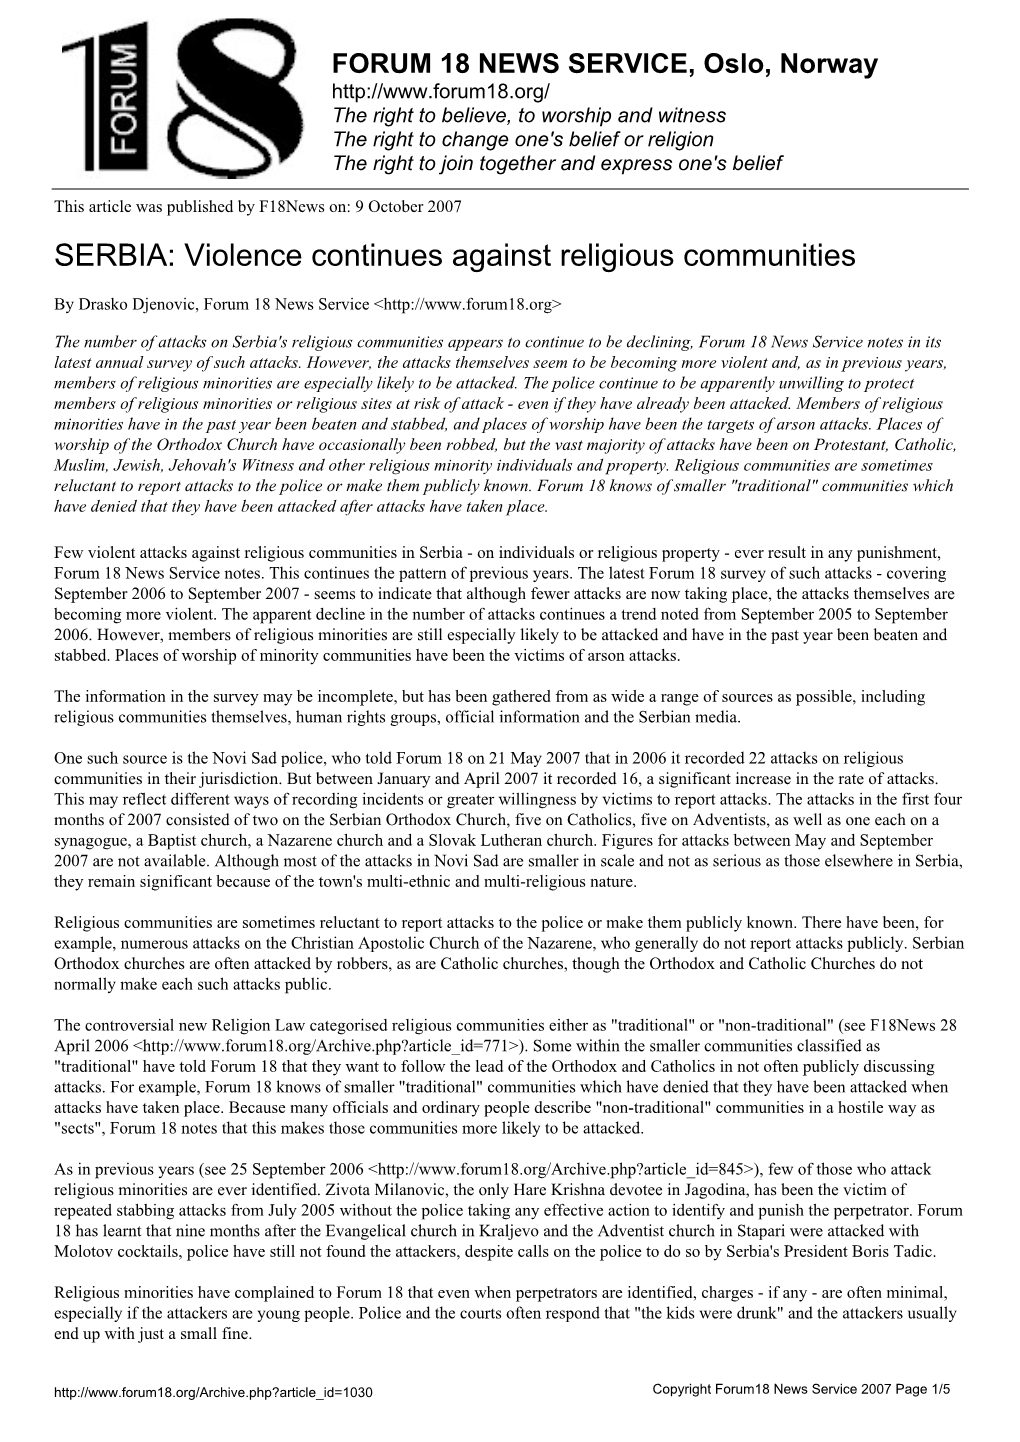 SERBIA: Violence Continues Against Religious Communities